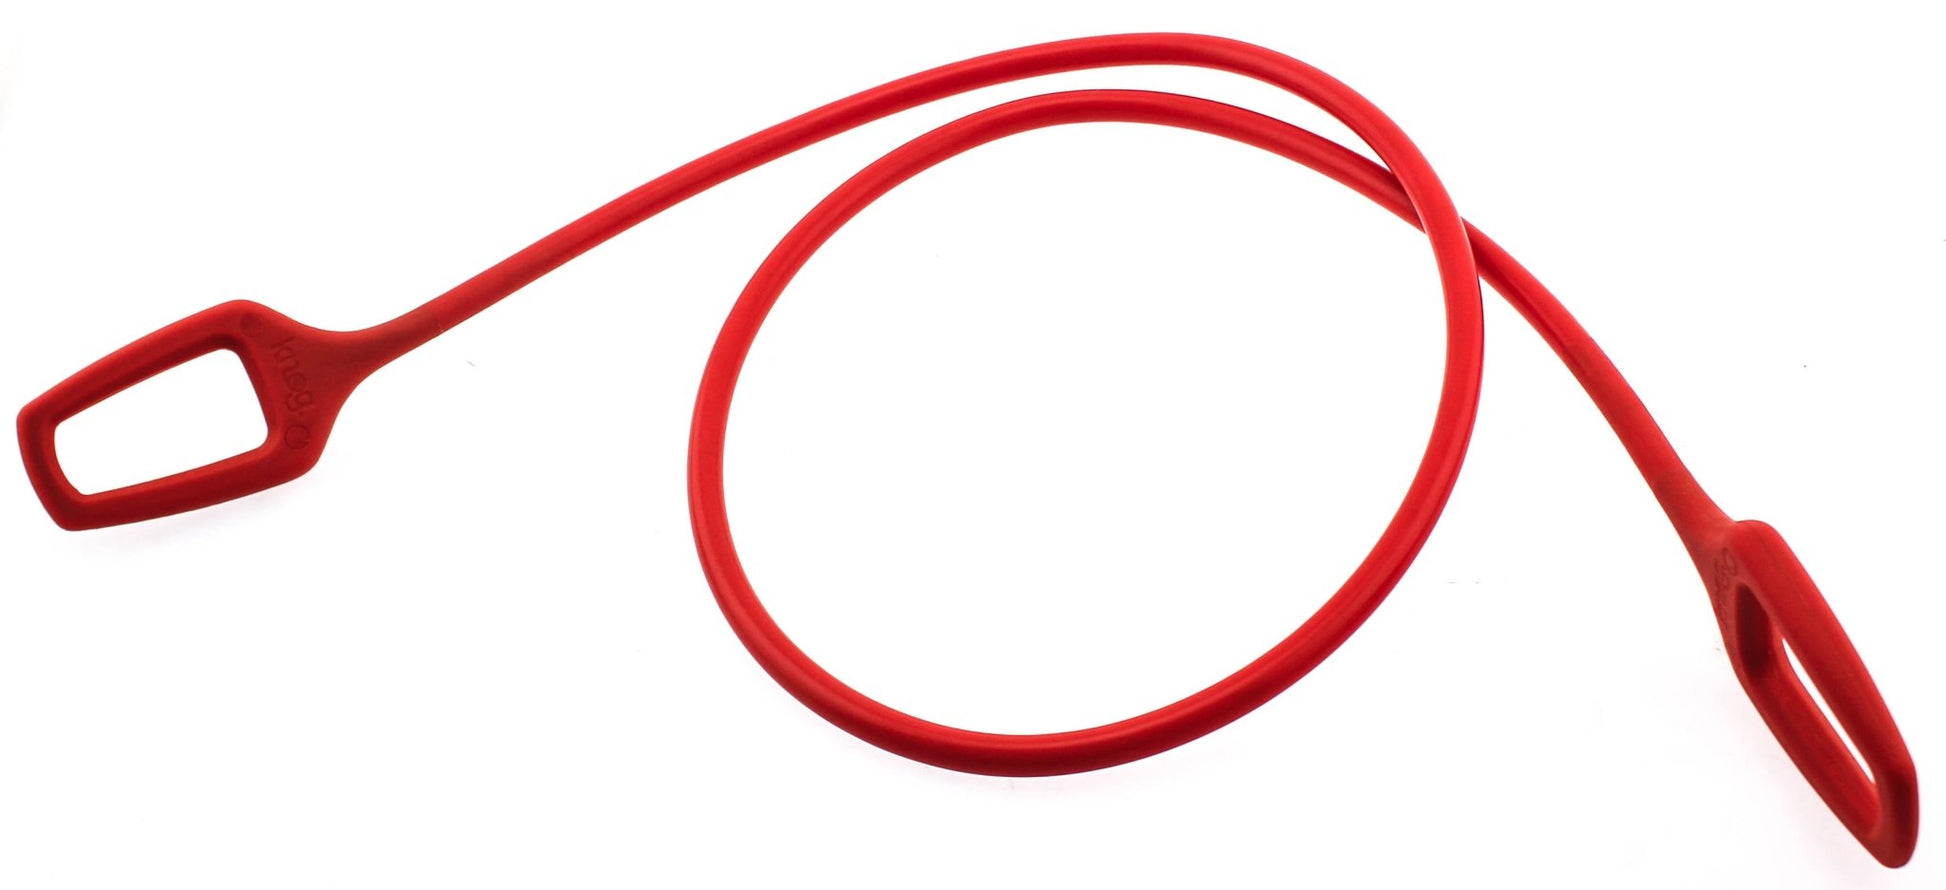 Knog Ring Master 1.2 Bike Cable 1200mm Silicone/Steel Red 10mm New - Random Bike Parts